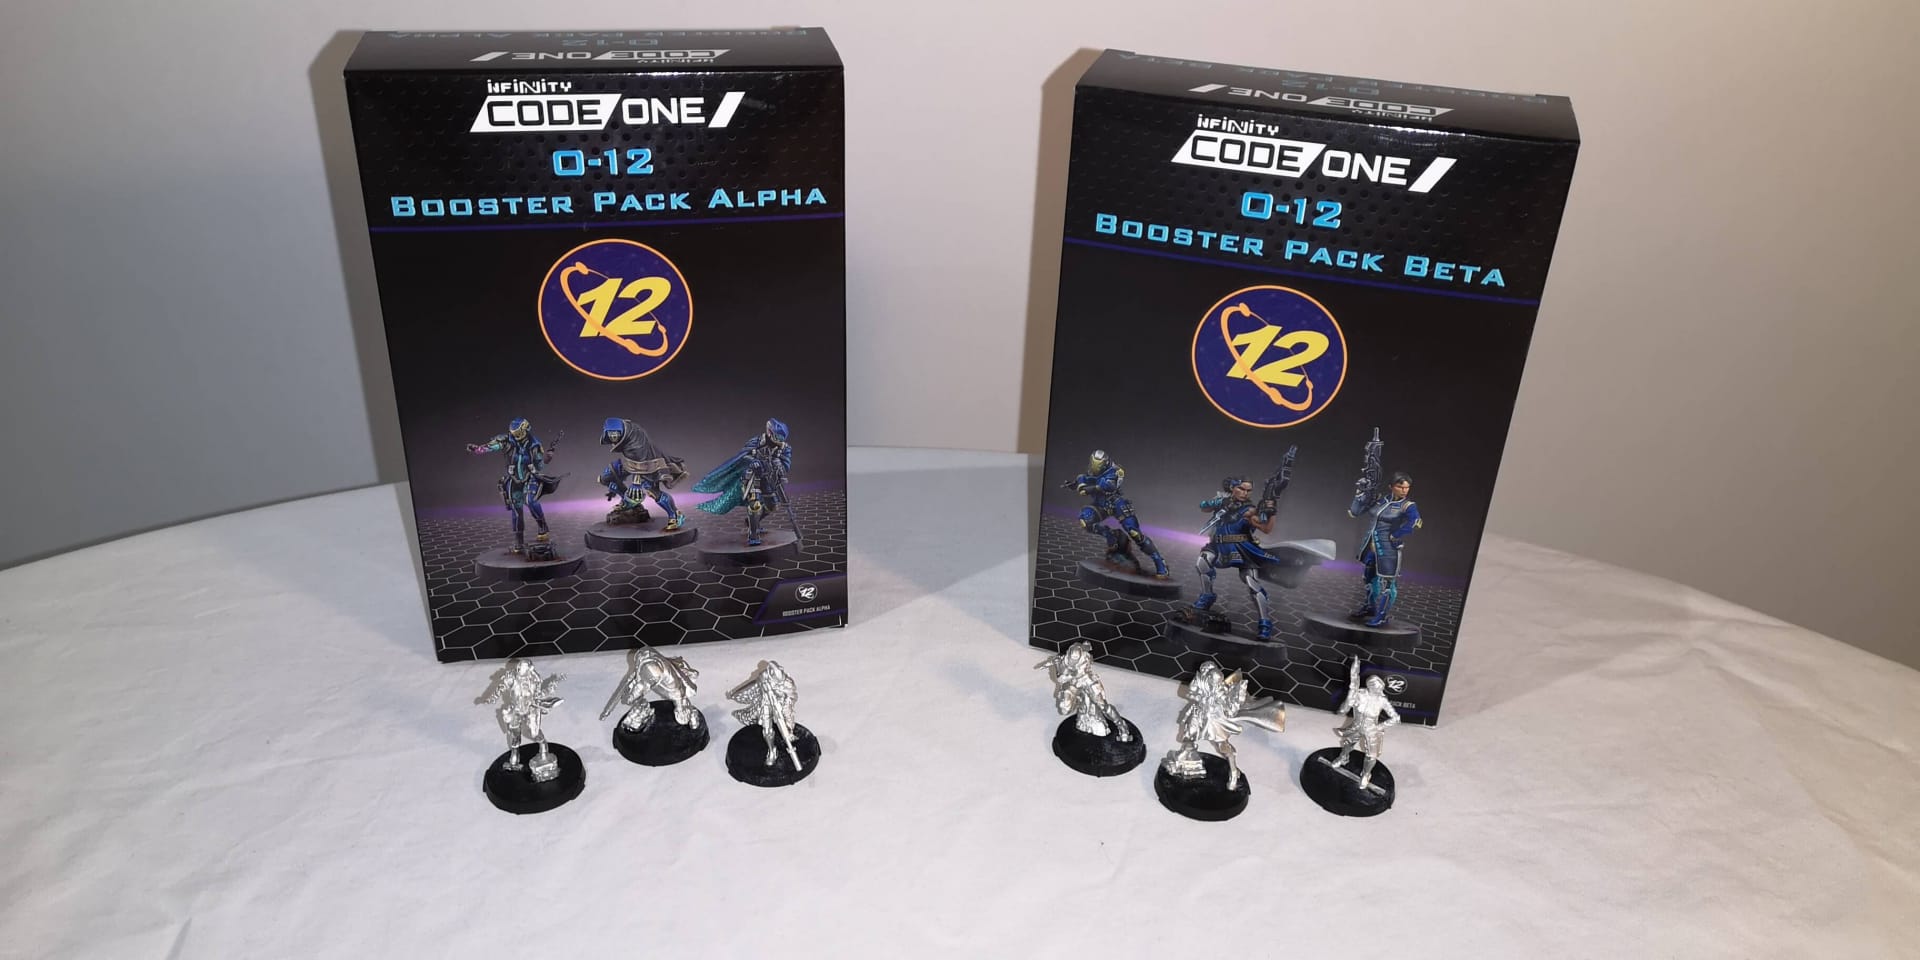 Infinity CodeOne O-12 Booster Pack Alpha and Beta.